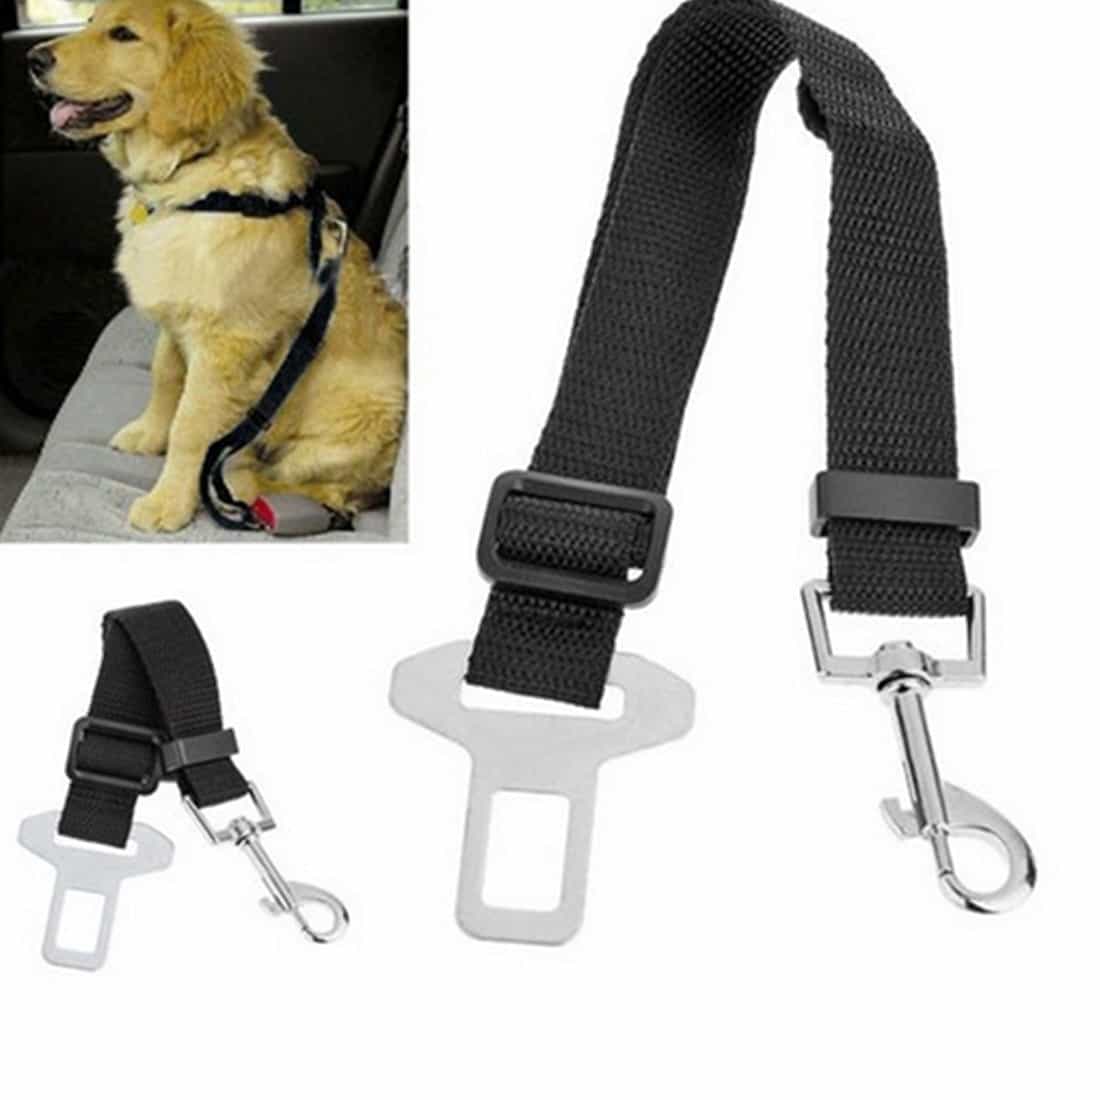 Protecting Fido: New safety standards for dog car harnesses